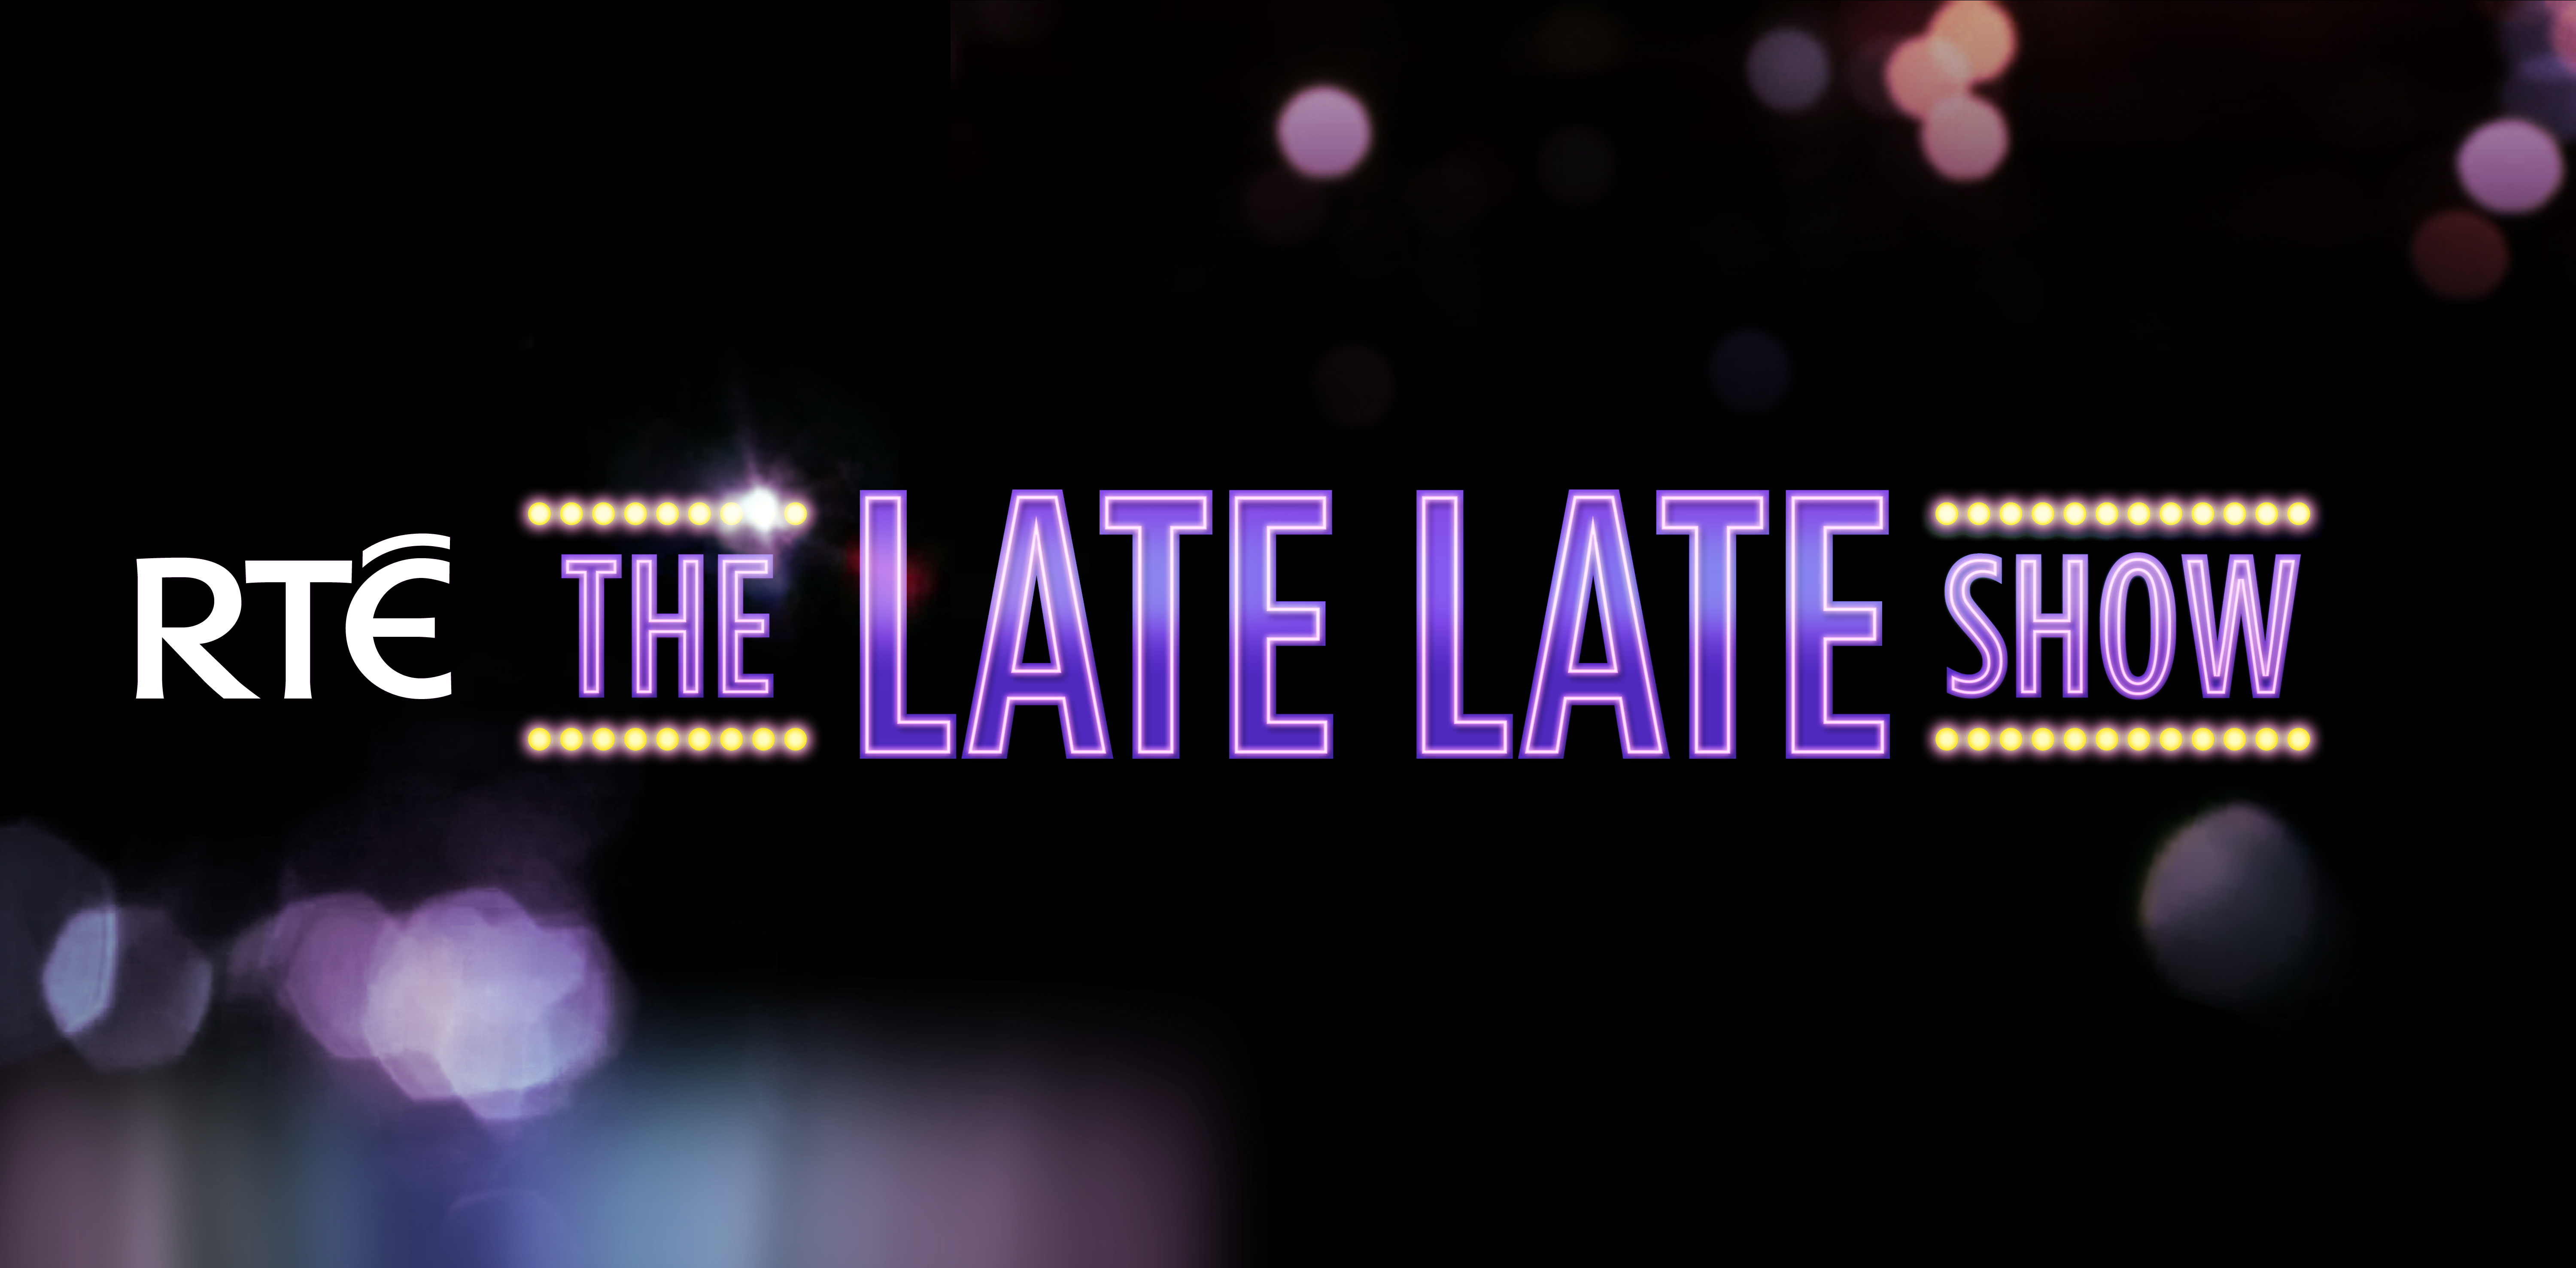 Live from IRELAND: The Late Late Show